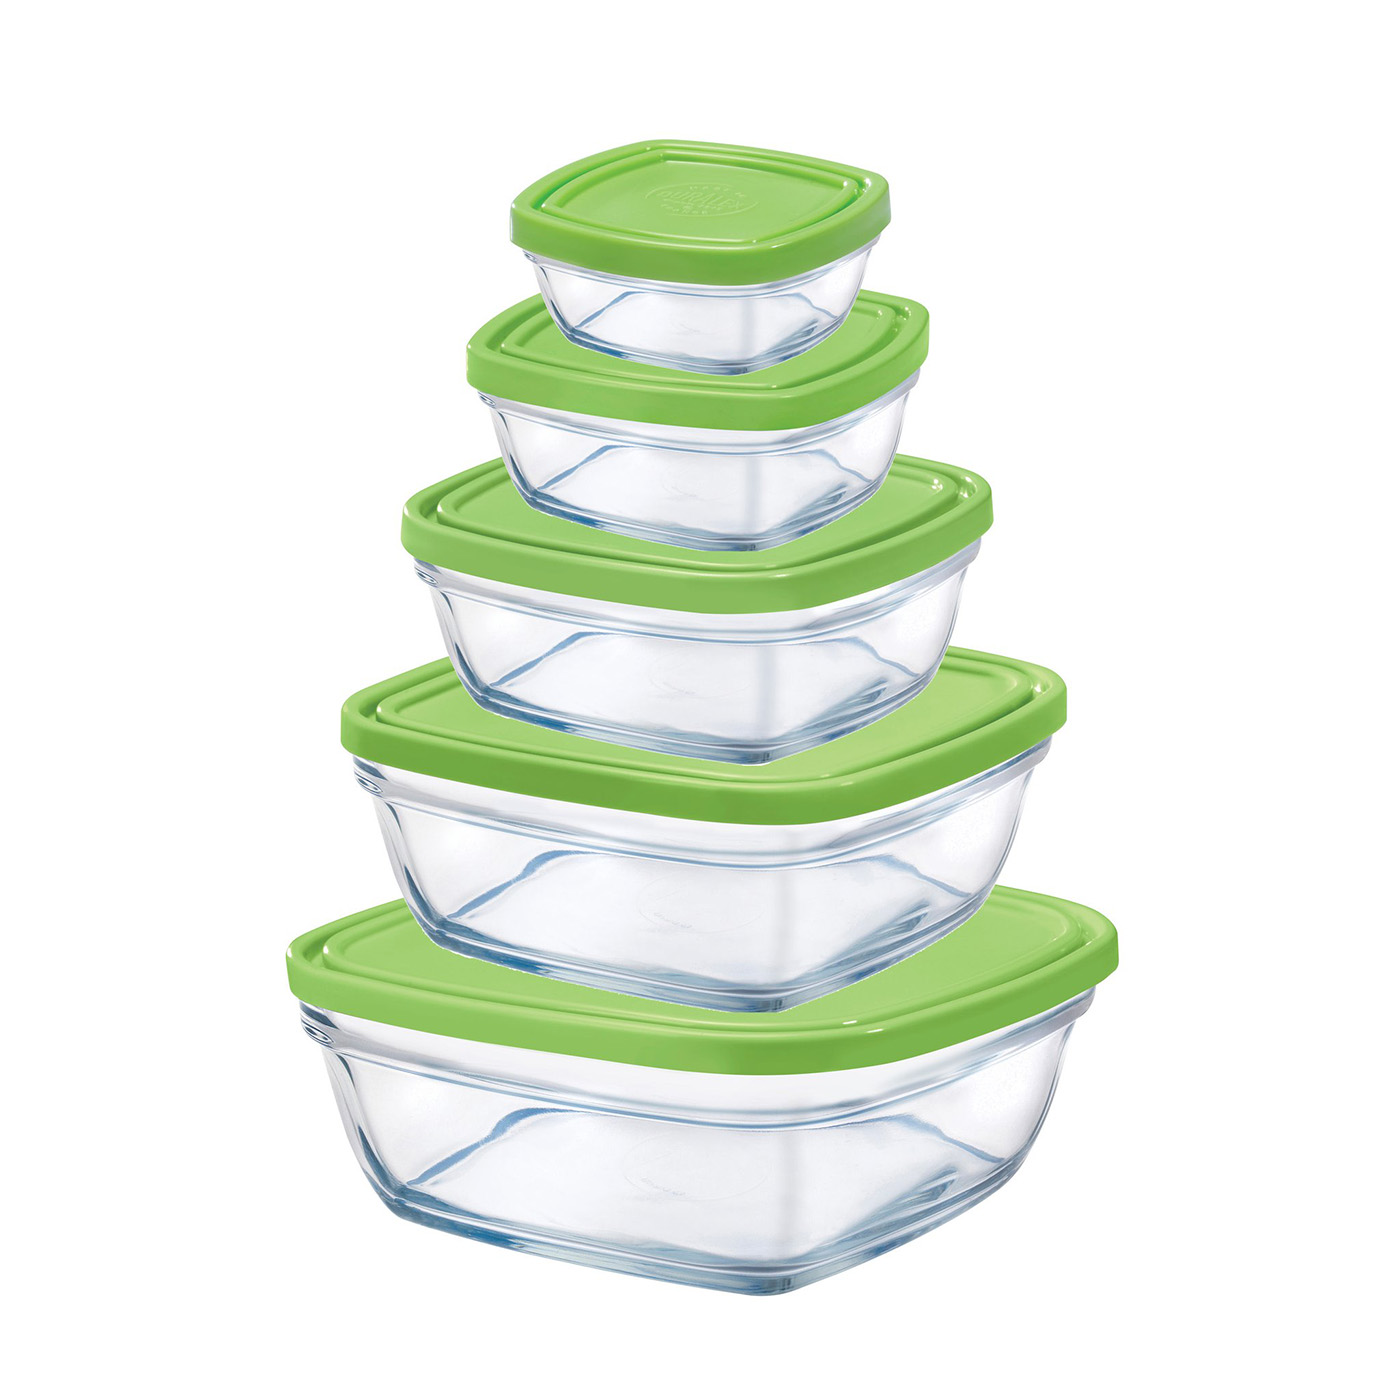 Duralex Lys 10 Piece Baby Set Tempered Glass Bowl Storage Containers with Lids 